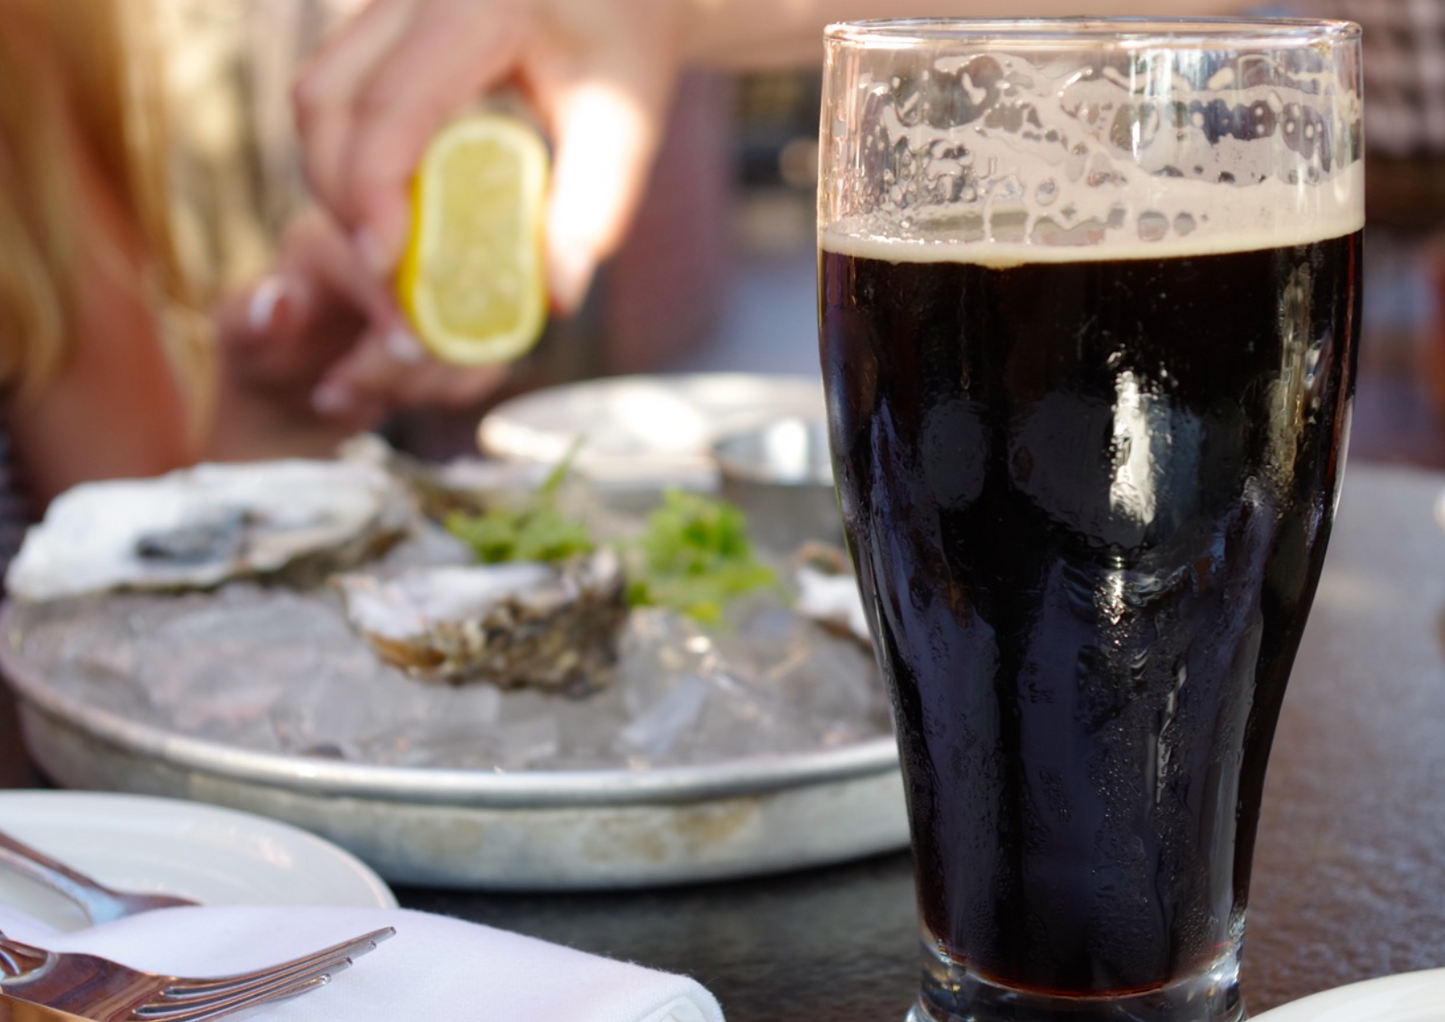 Oyster Pairing: Top Virginia Beers to Pair with Your Oysters for the Super Bowl